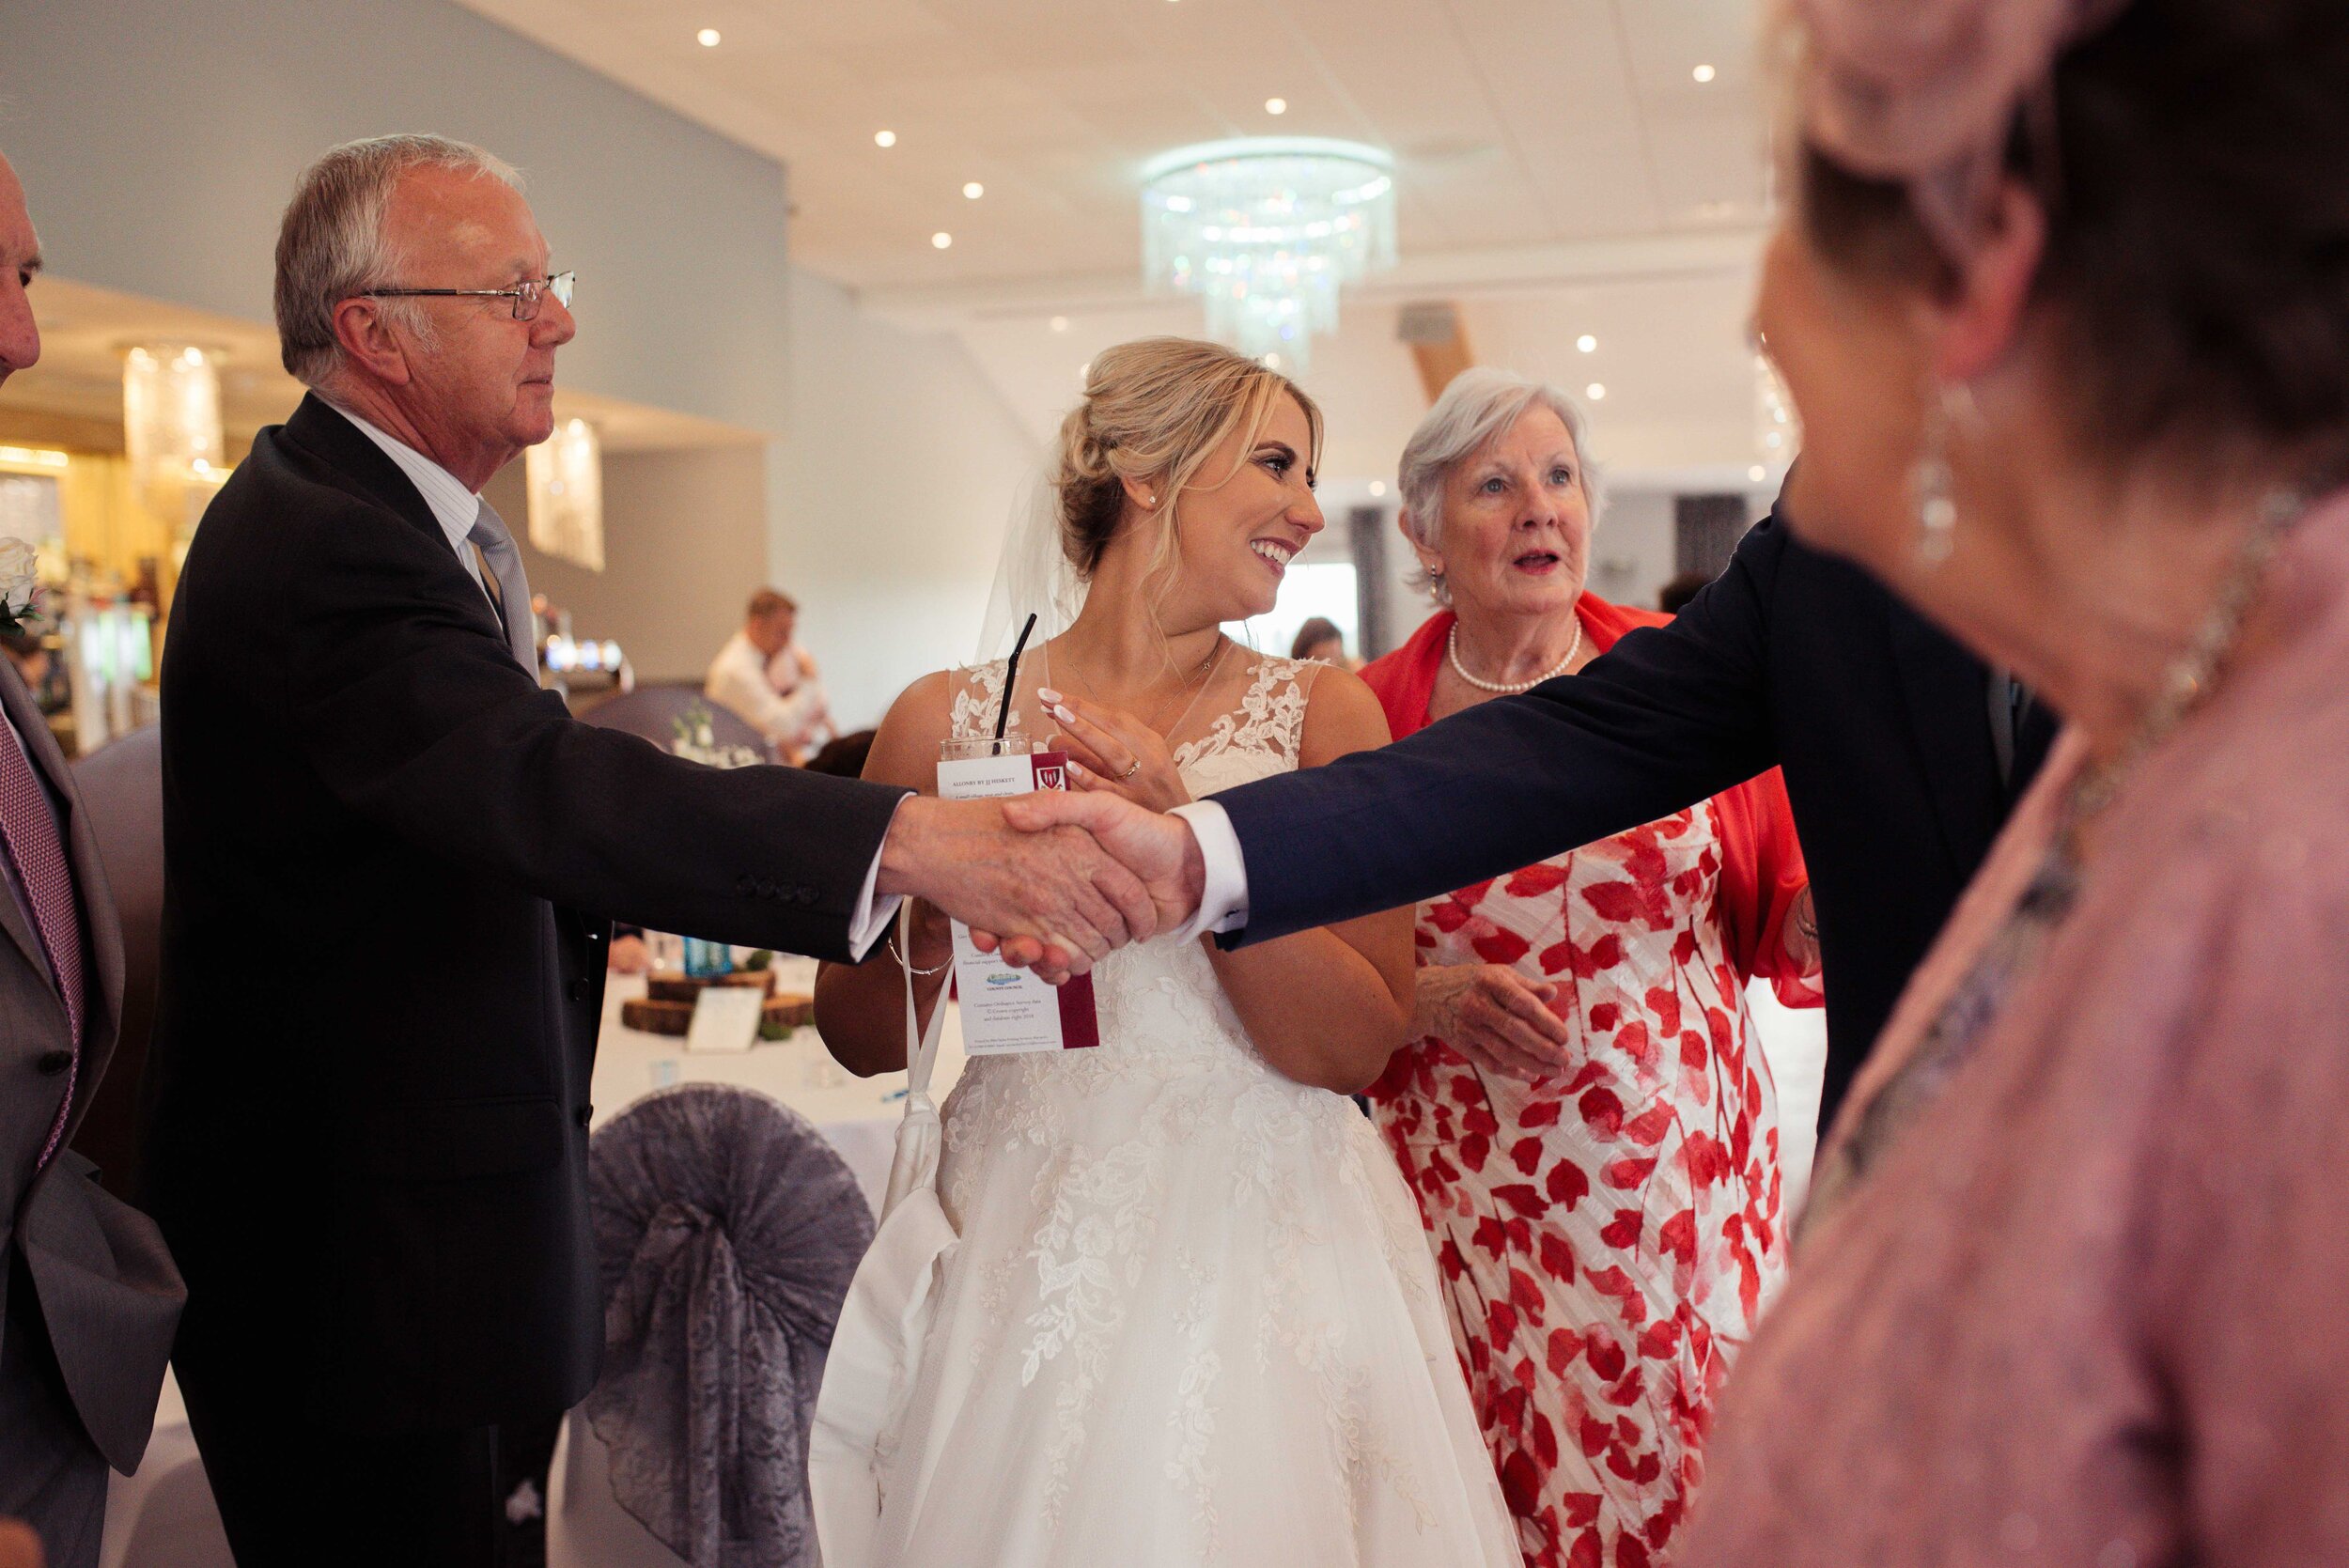 Guests shake hands with the bride in the background